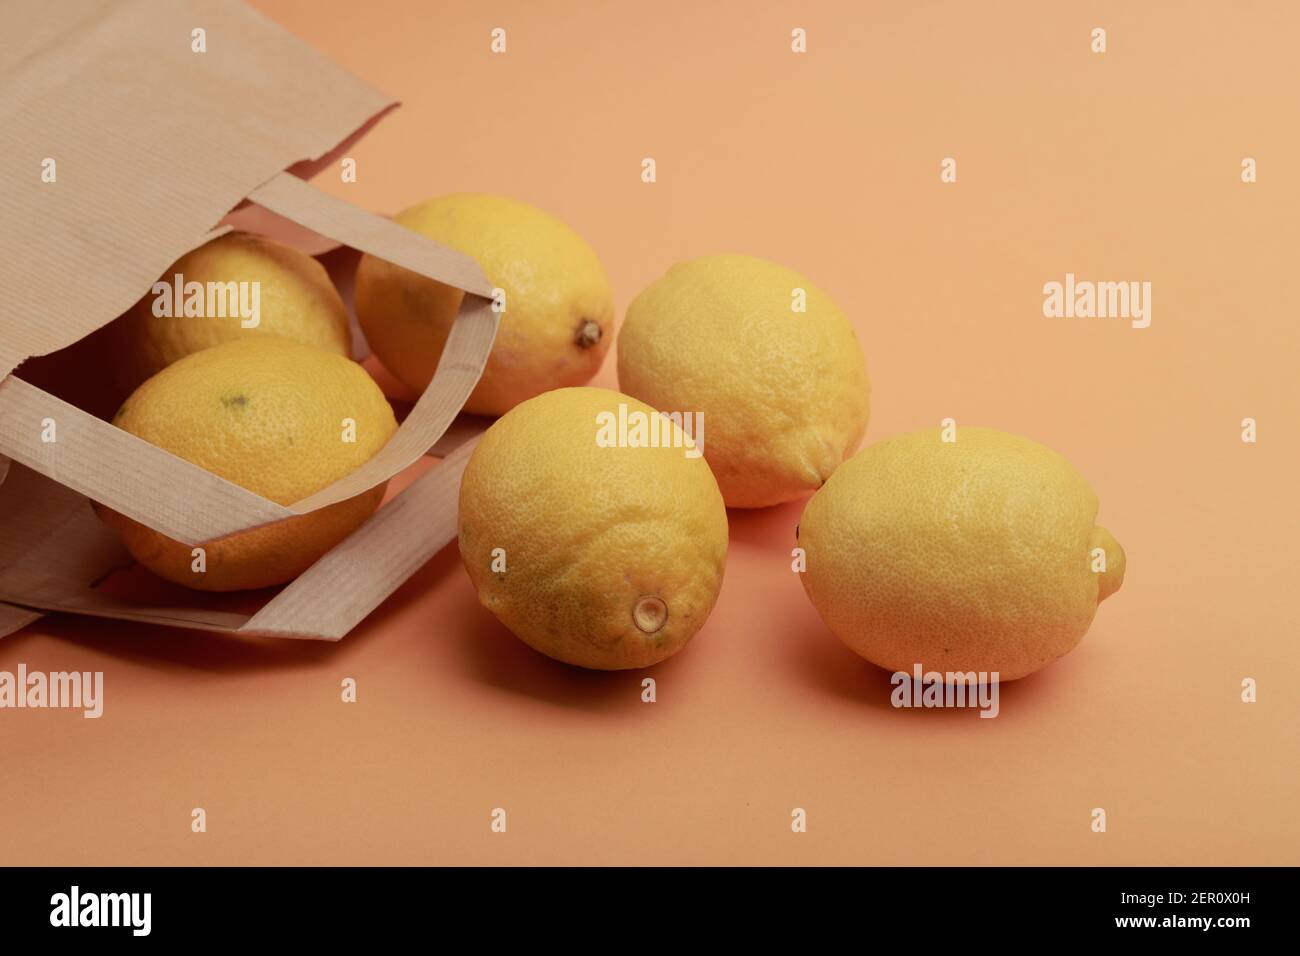 photo of lemon coming out of a supermarket paper bag on orange background and pastel colors Stock Photo